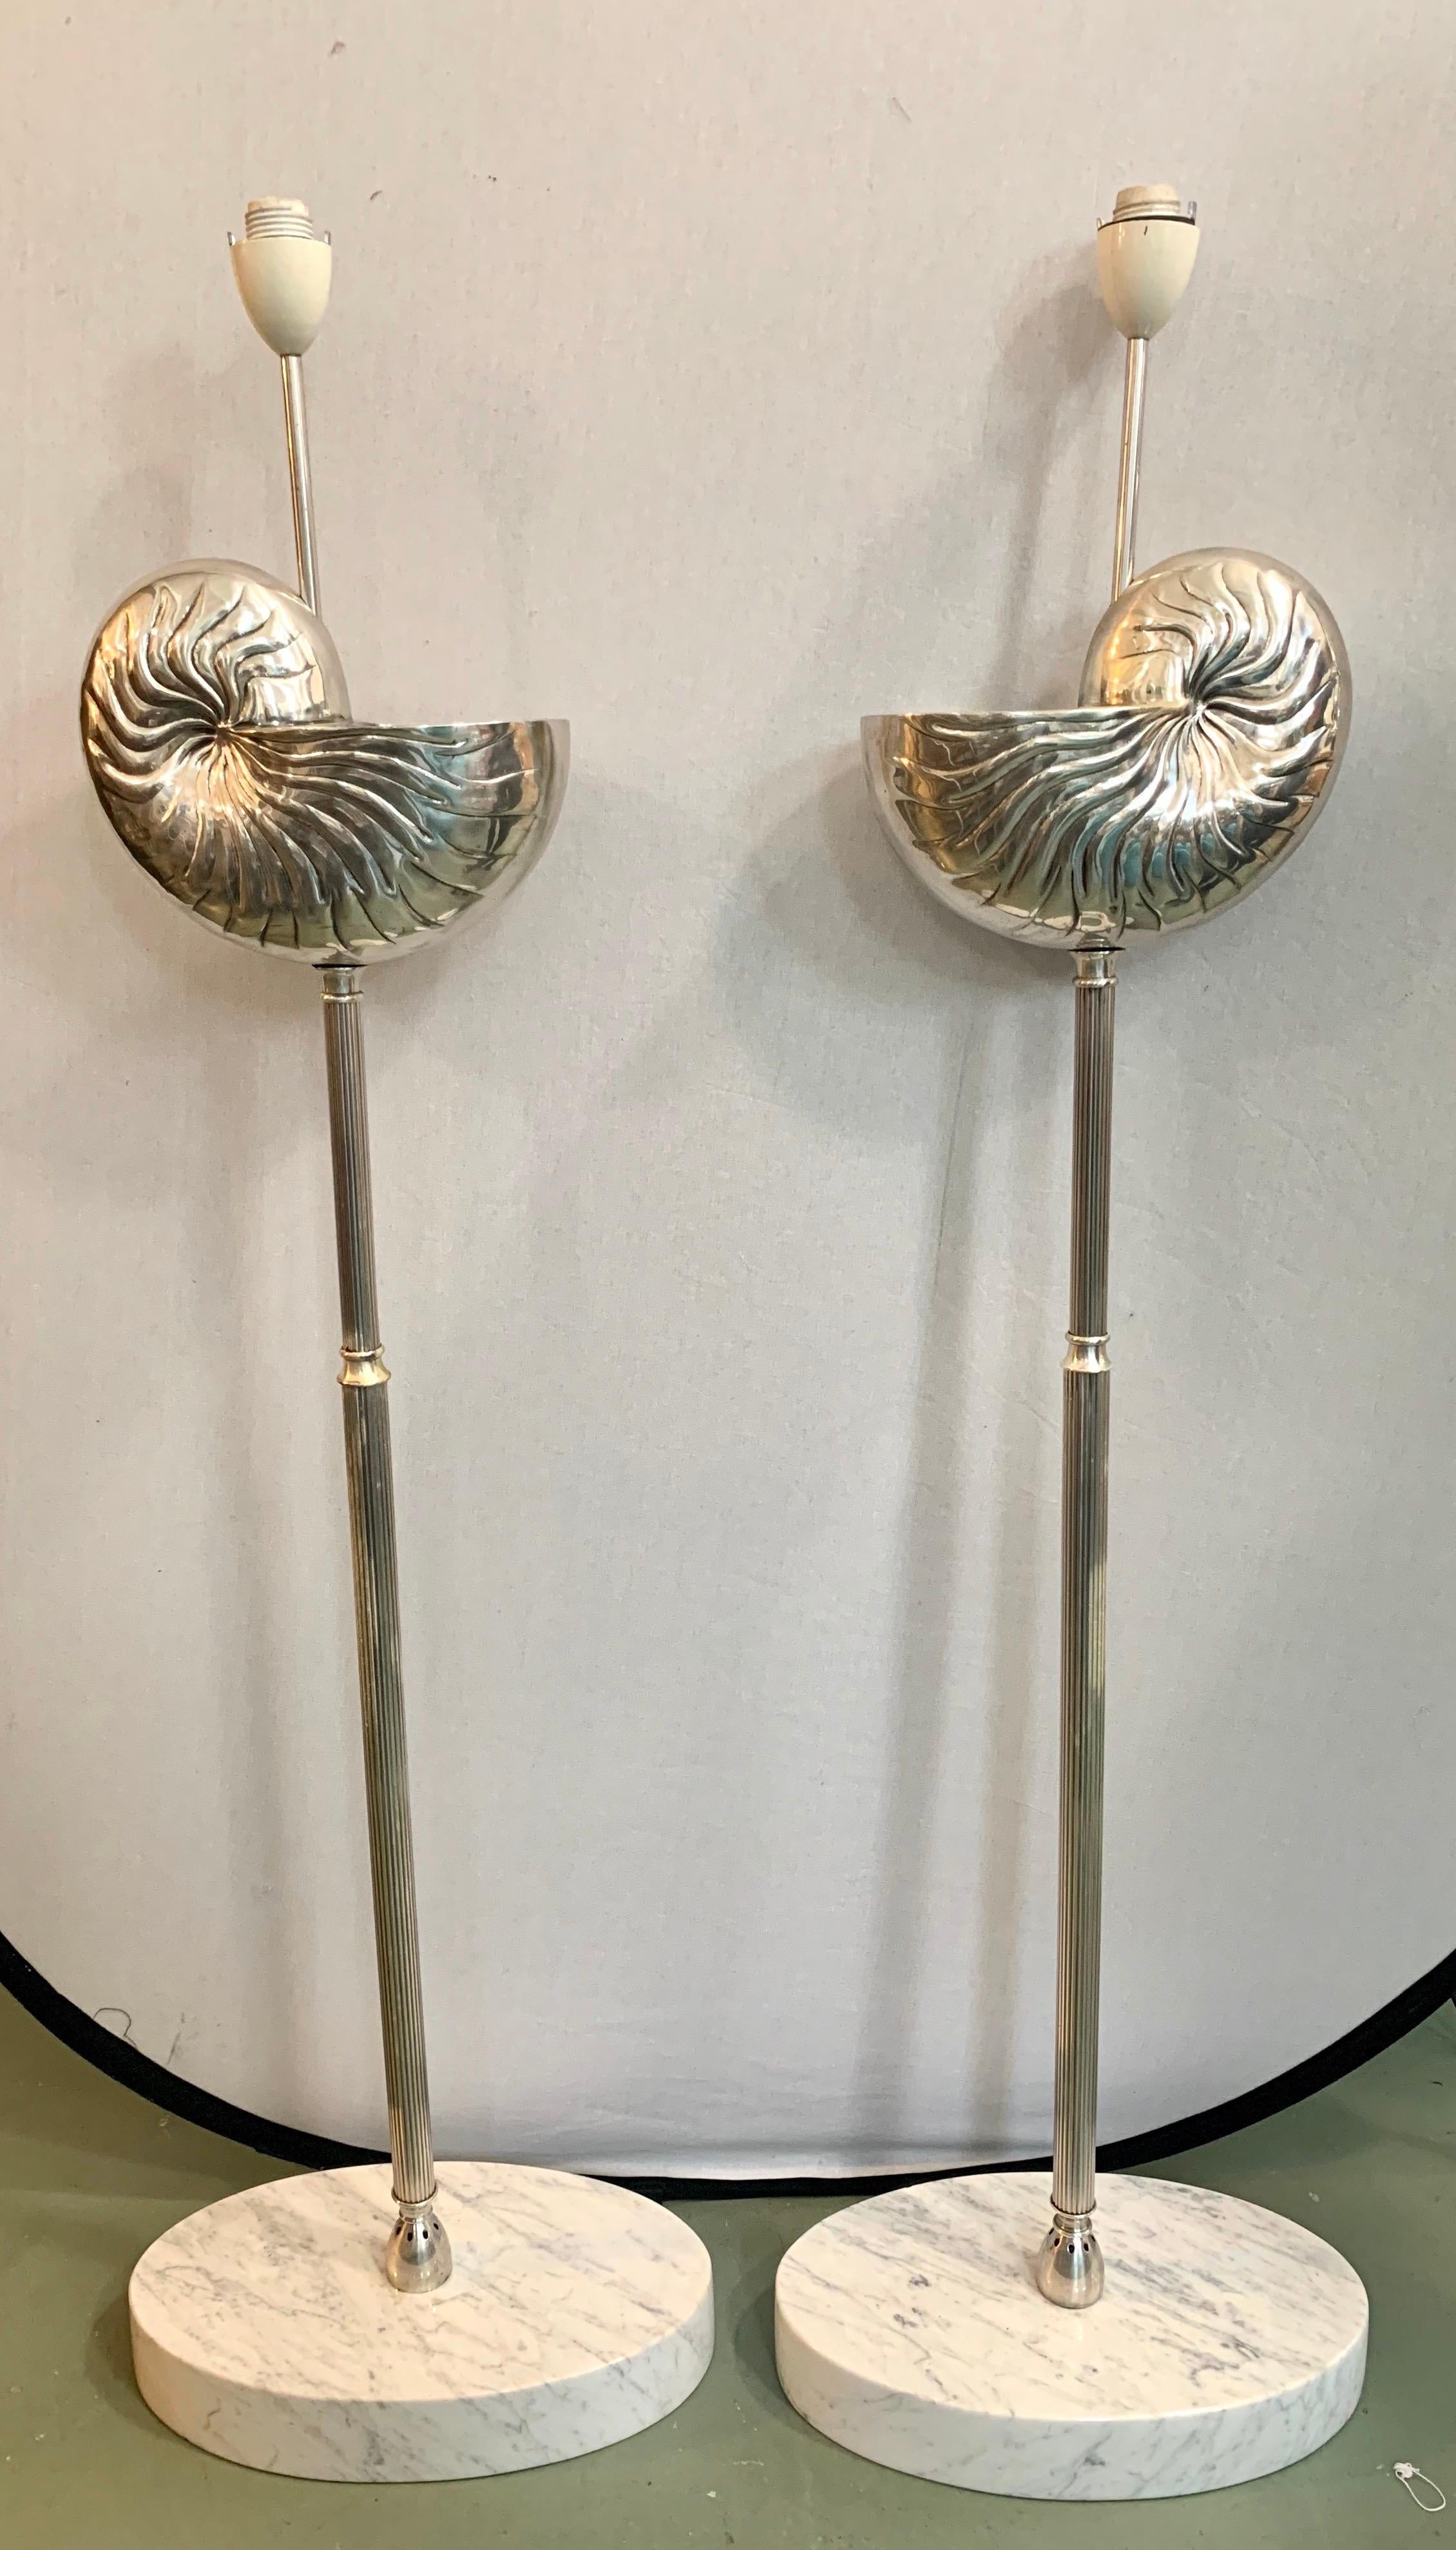 Unusual pair of matching tall Mid-Century Modern snail shell silver floor lamps with one bulb.
Wired for USA and in perfect working order. Now, more than ever, home is where
the heart is.